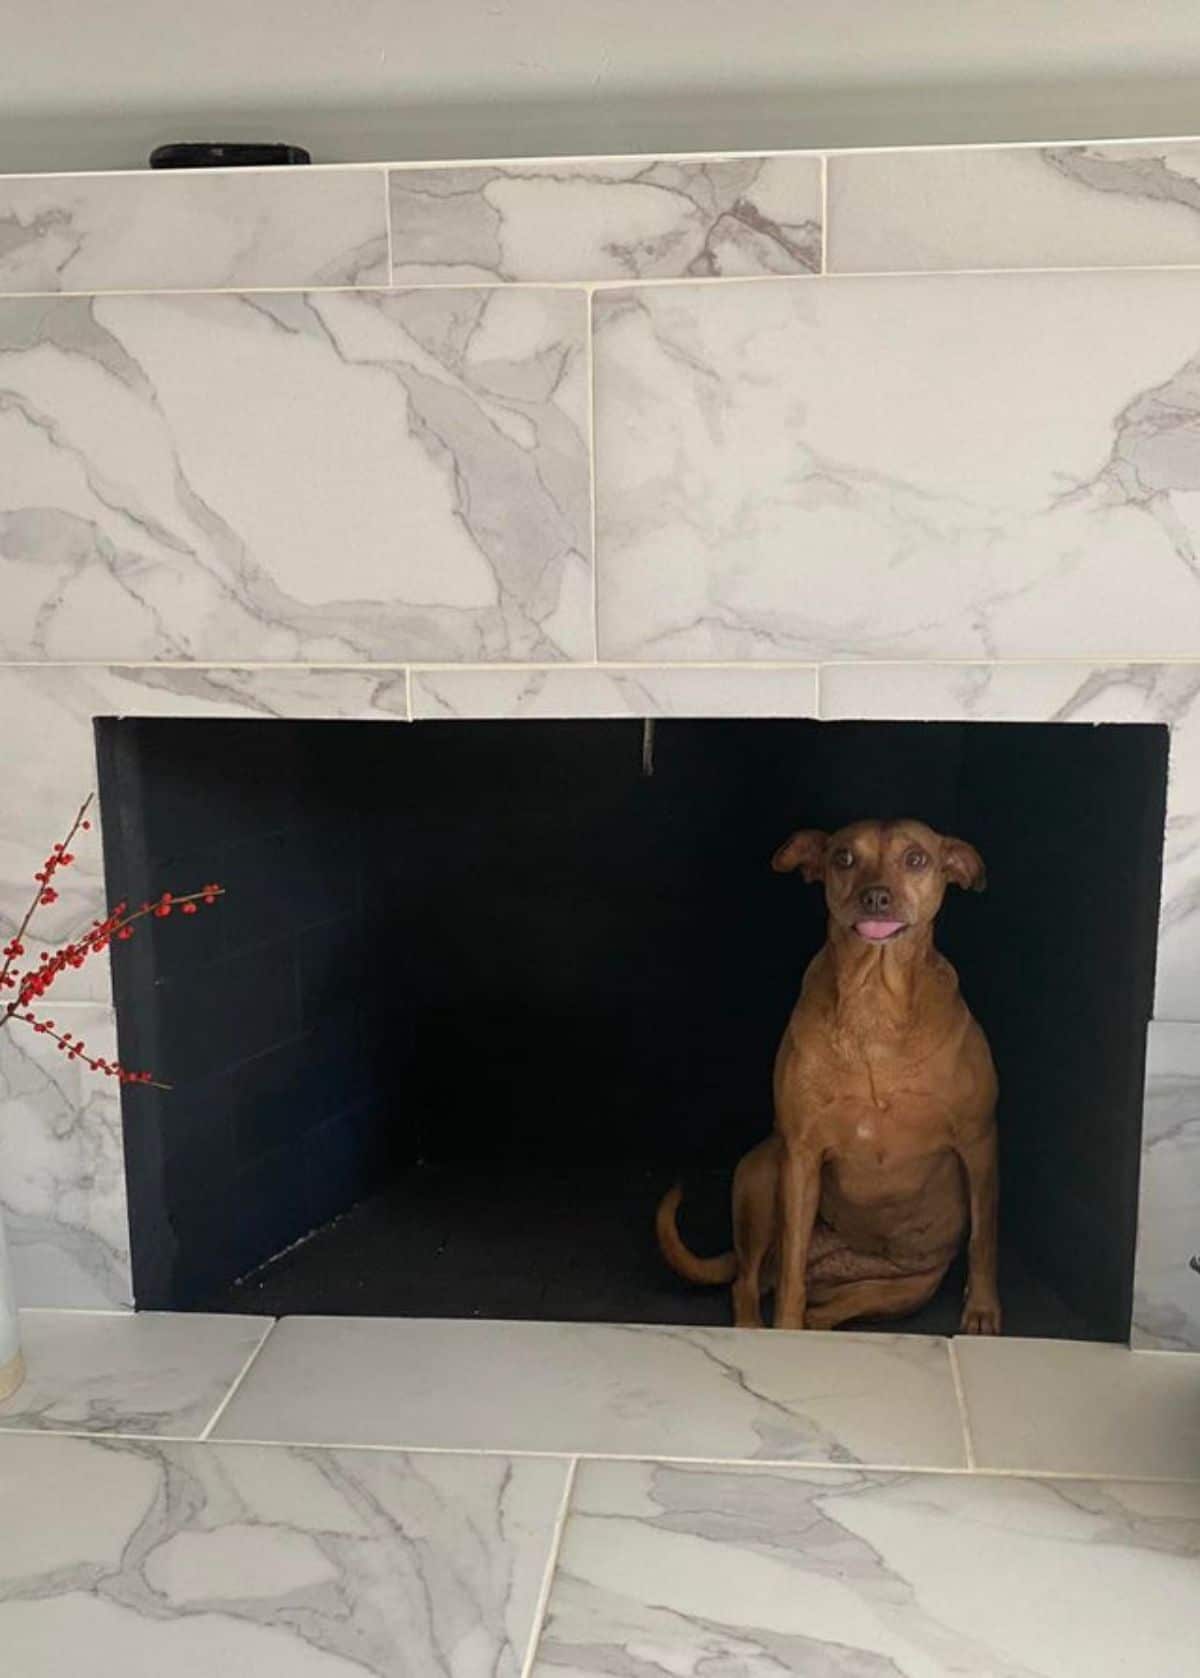 brown dog with the tongue sticking out slightly sitting in an empty fireplace with white and grey marble on the floor and the walls of the fireplace